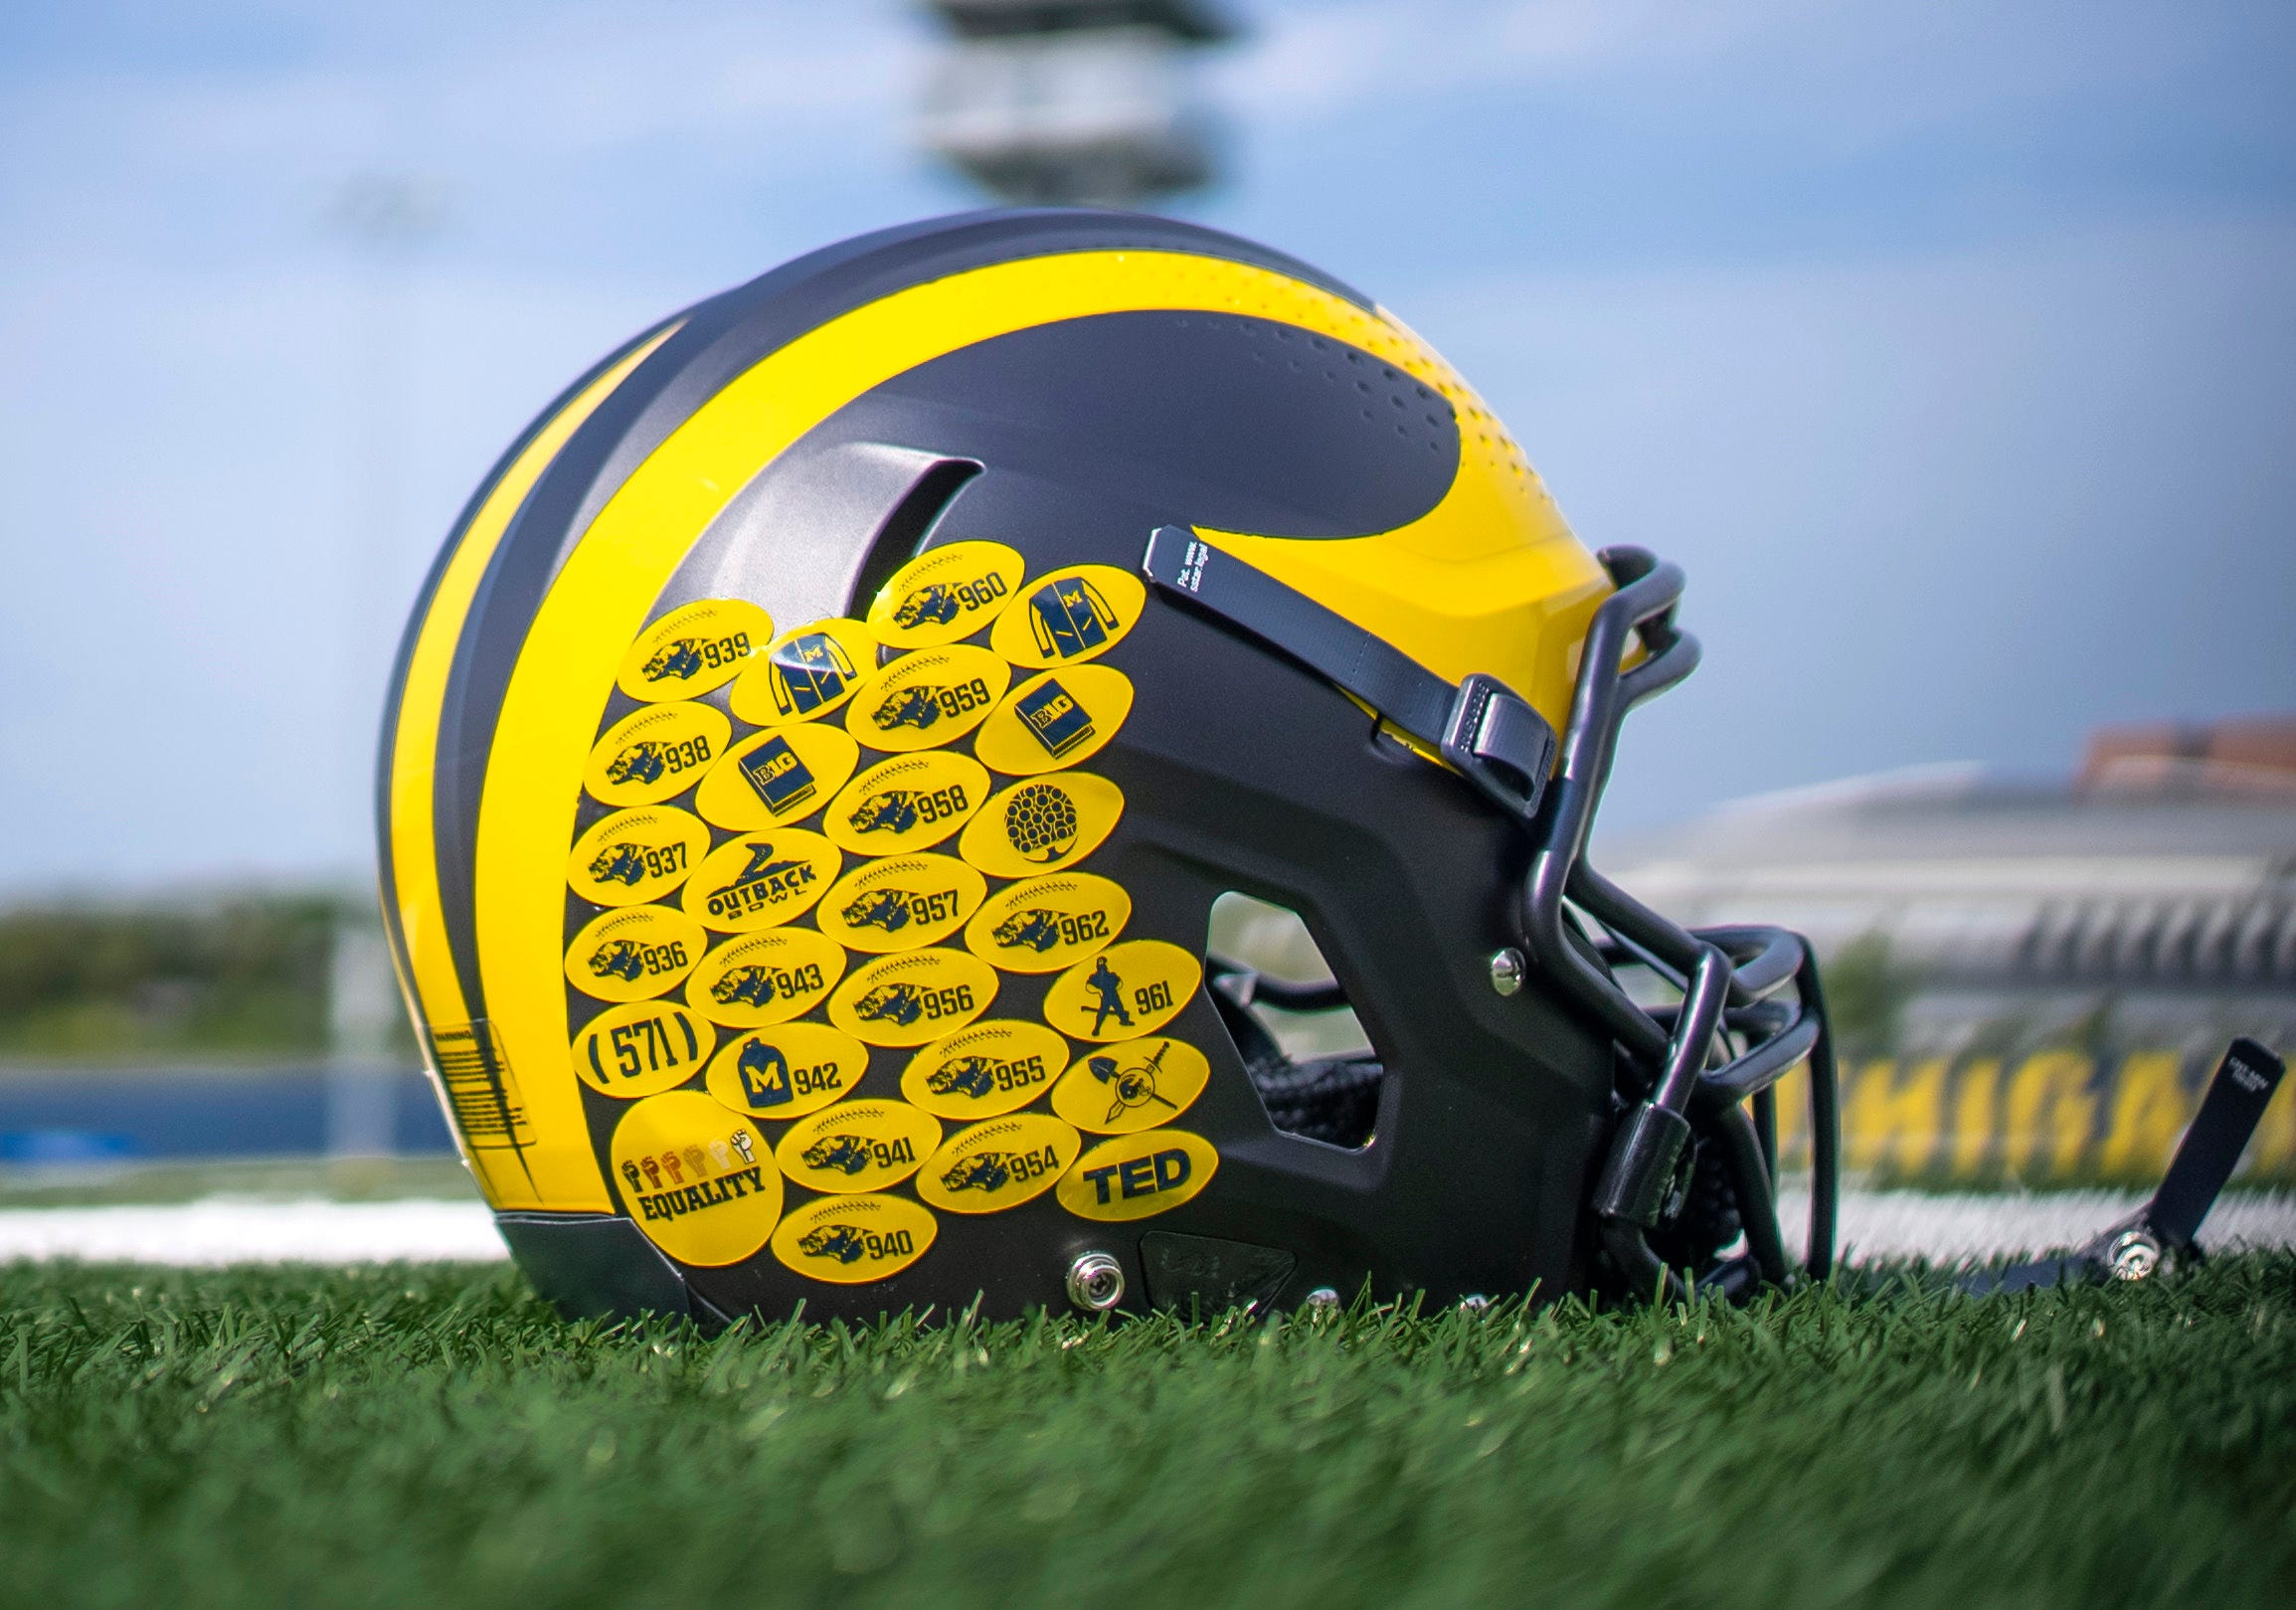 Alice as Kruiden New Michigan helmet stickers to tell story of a player's career